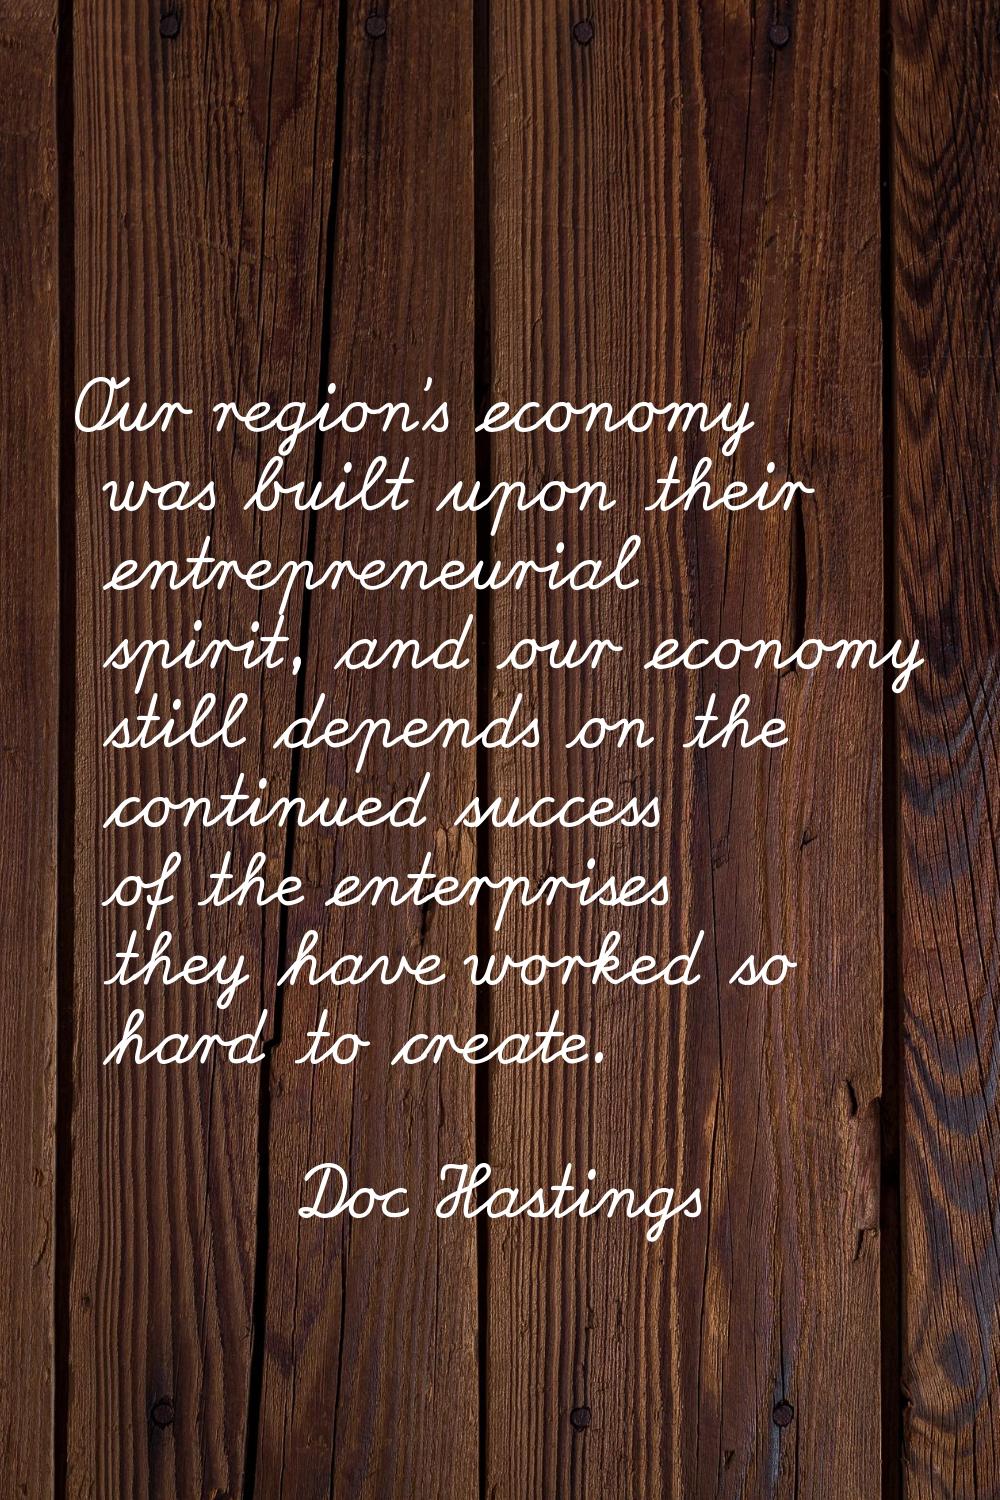 Our region's economy was built upon their entrepreneurial spirit, and our economy still depends on 